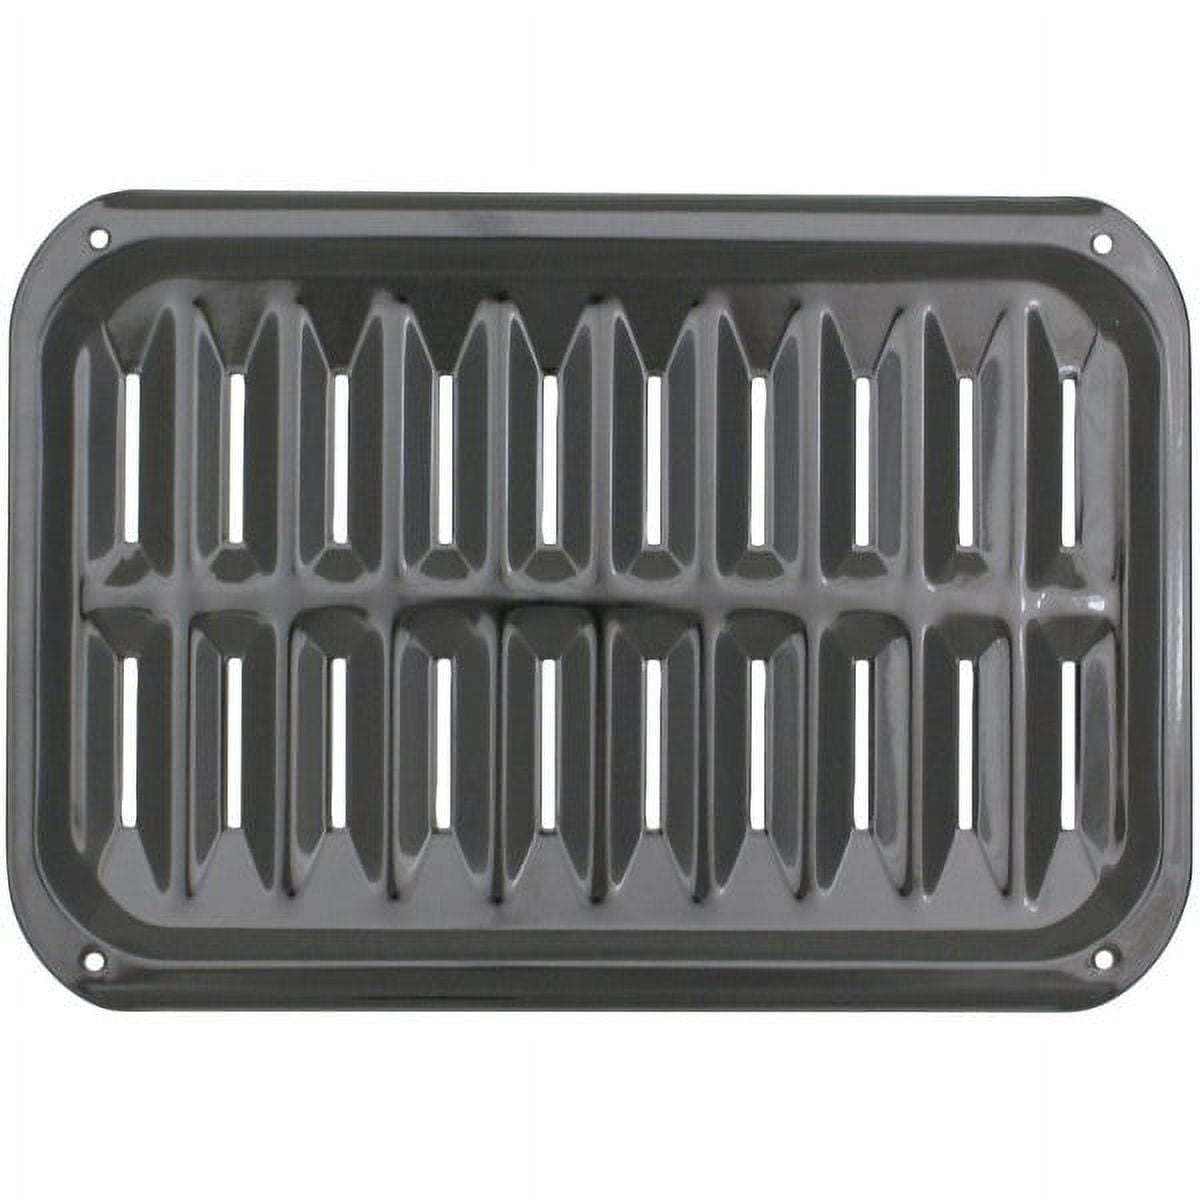 Range Kleen Broiler Pans for Ovens - Bp102x 2 PC Black Porcelain Coated Steel Oven Broiler Pan with Rack 16 x 12.5 x 1.6 Inches (Black)